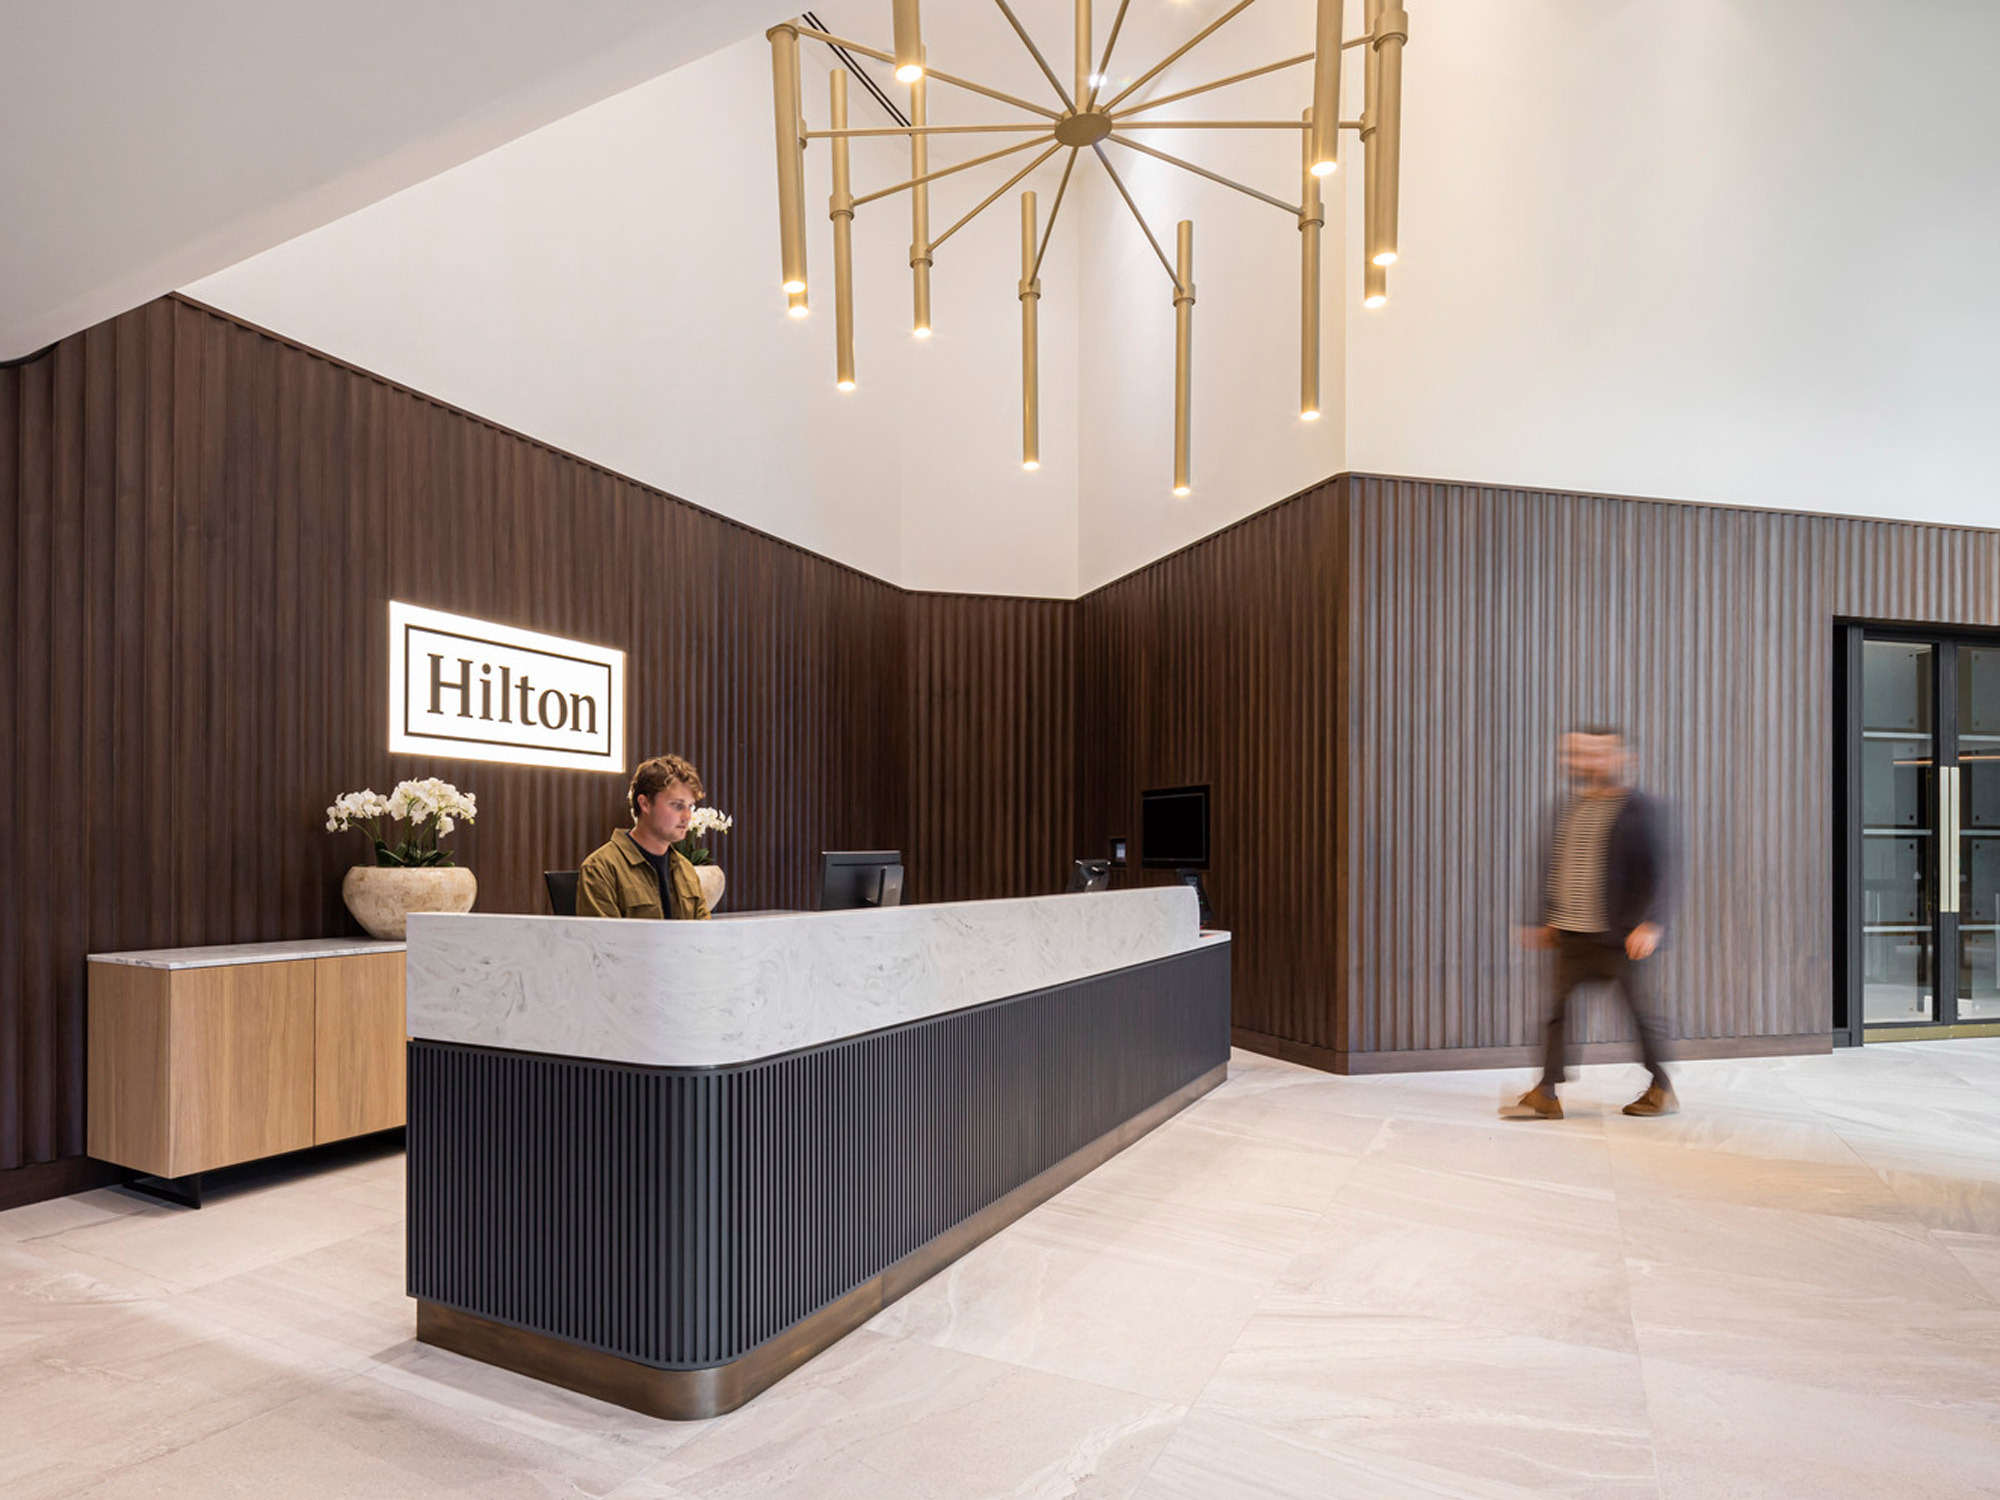 Modern hotel lobby featuring a minimalist walnut reception desk with a white marble top, flanked by cream floor tiles. A geometric gold chandelier hangs above, complementing the sleek, dark wood-panelled walls and ambient lighting. Two individuals provide a sense of scale and activity.